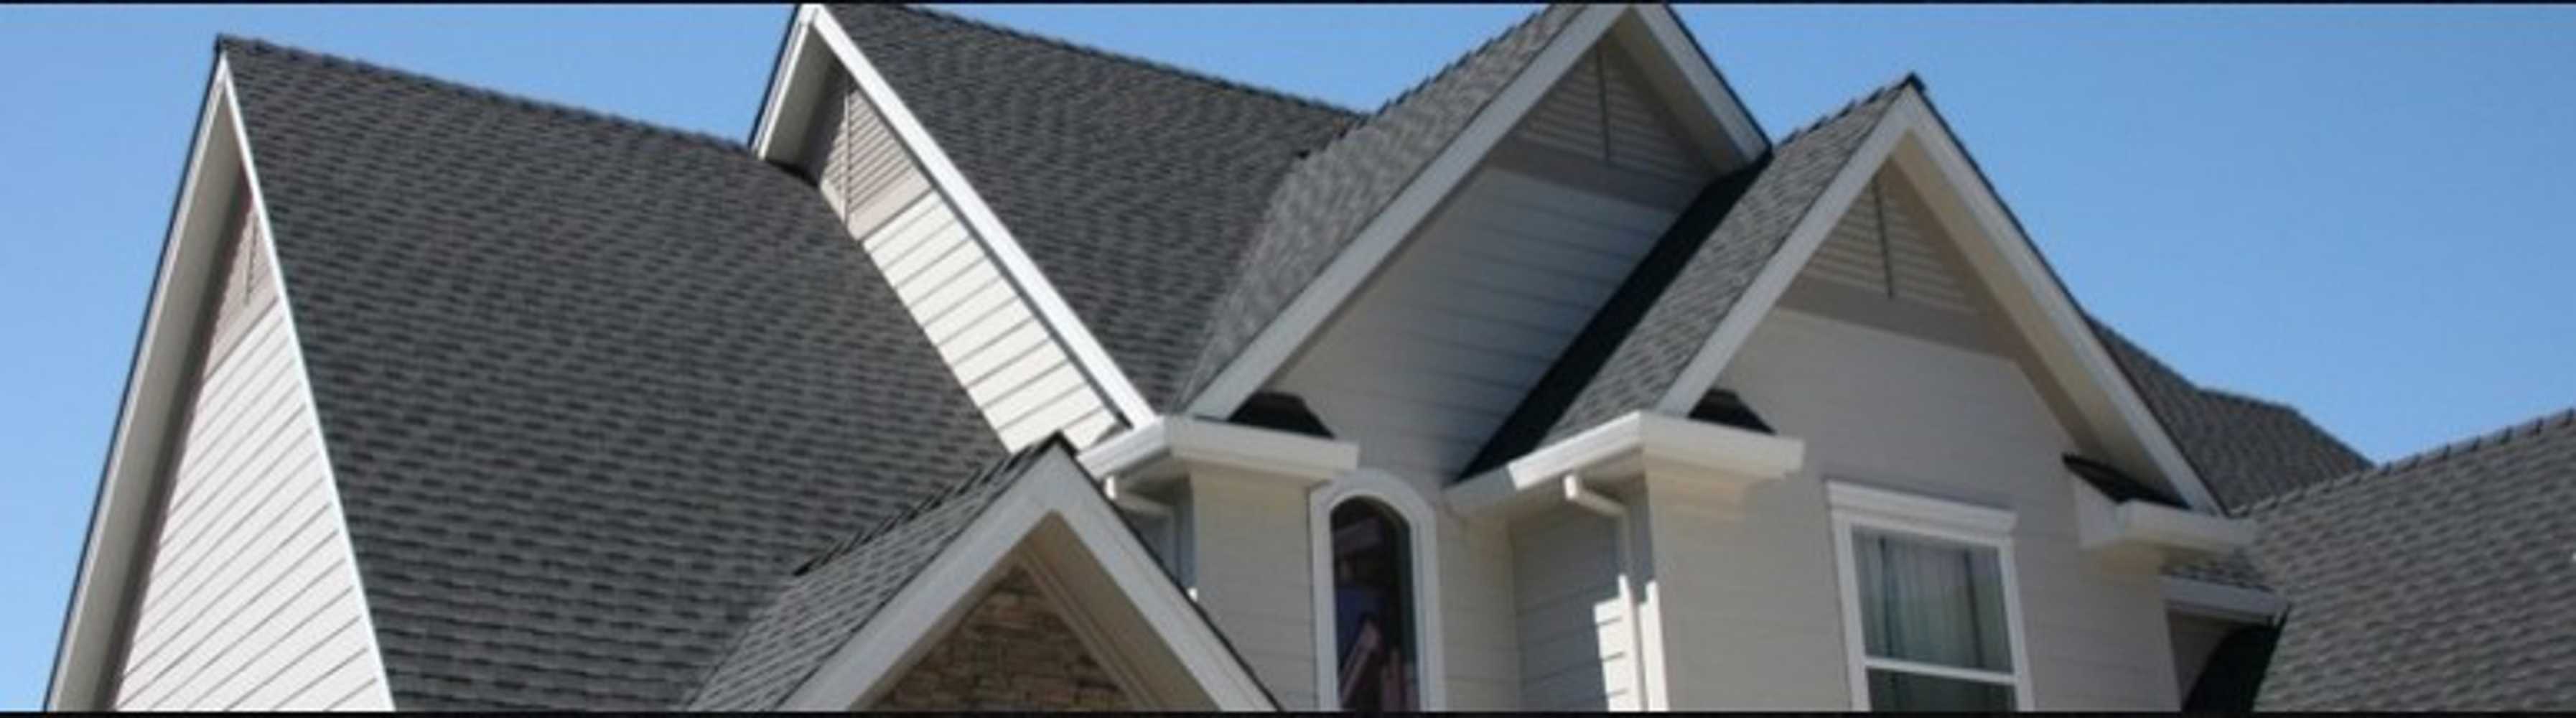 Orlando Roofing Projects